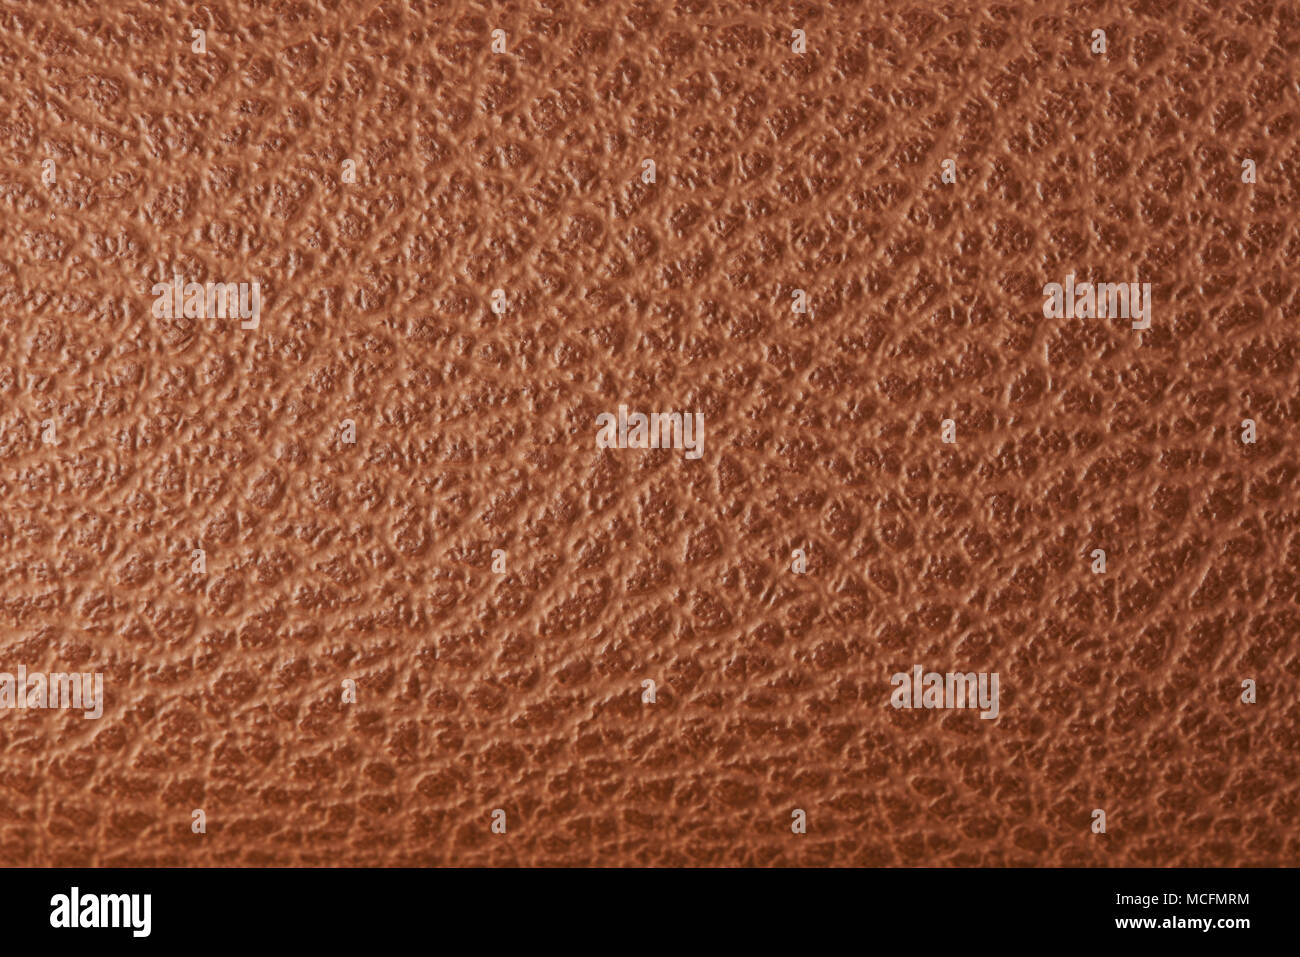 Flat brown leather texture close up. Cow textured skin Stock Photo